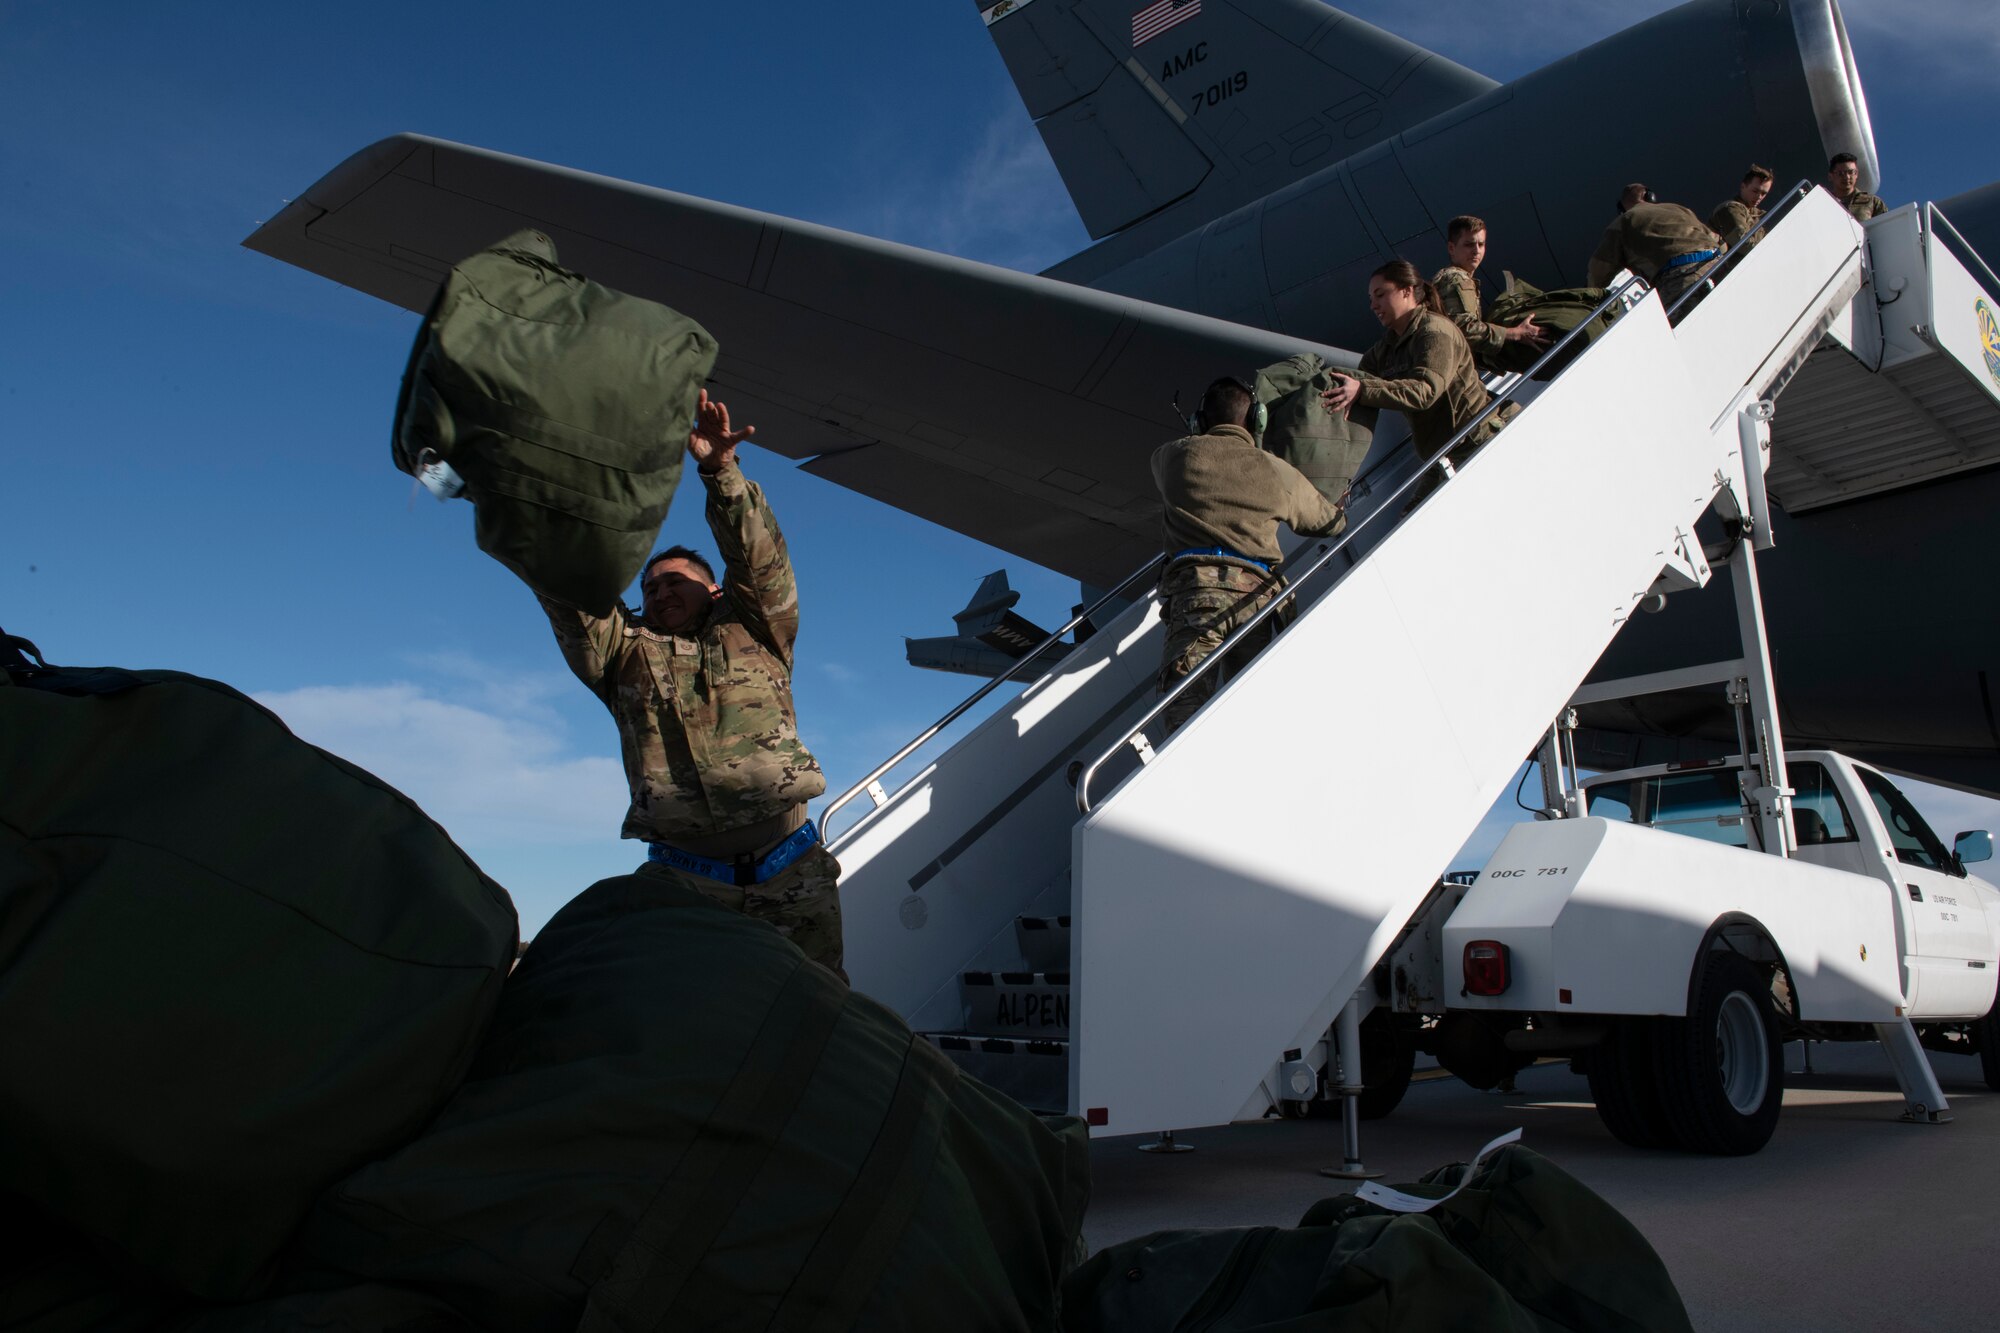 U.S. Airmen from the 60th Air Mobility Wing at Travis Air Force Base, California, off-load mission-oriented protective postures (MOPP) gear bags and luggage out of a KC-10 Extender from a staircase at the Alpena Combat Readiness Training Center, Alpena, Michigan, April 10, 2022.